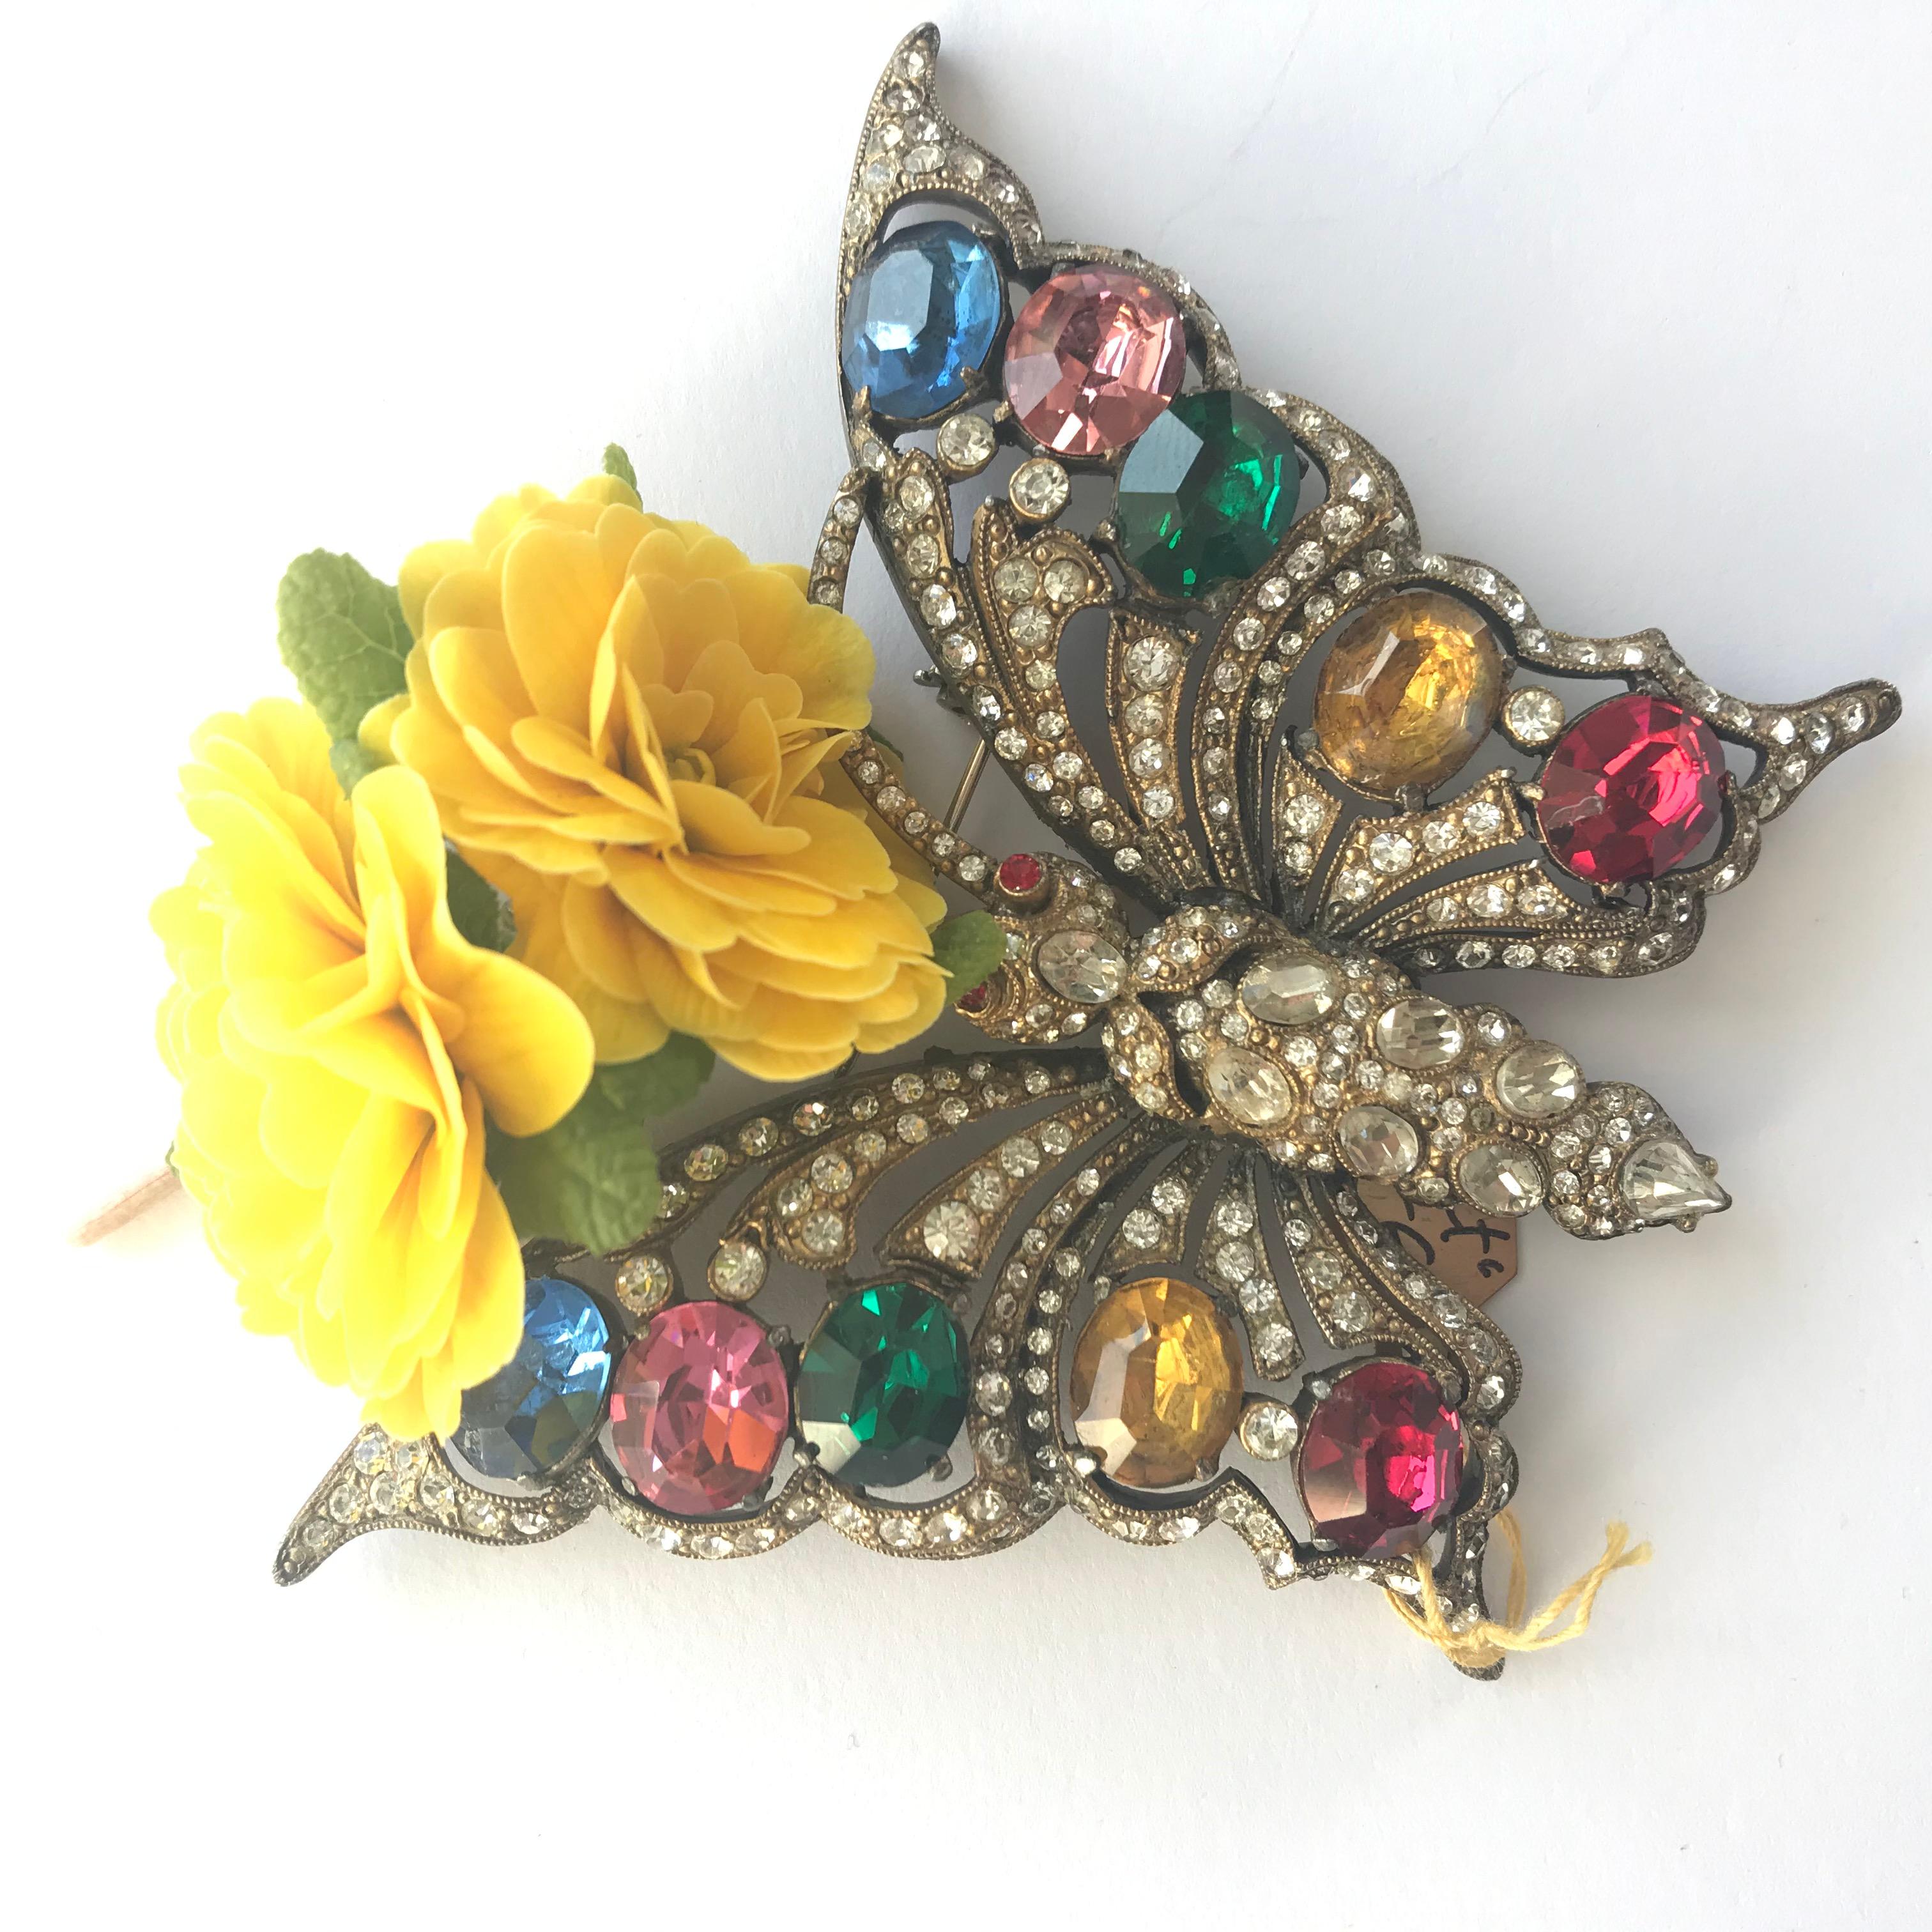 A wonderful rhinestone brooch in the shape of a butterfly. The whole brooch is set with 10 large cut, colorful rhinestones. The rest of the body is completely covered with small to large clear rhinestones. A typical work from the 1930/40s work USA,